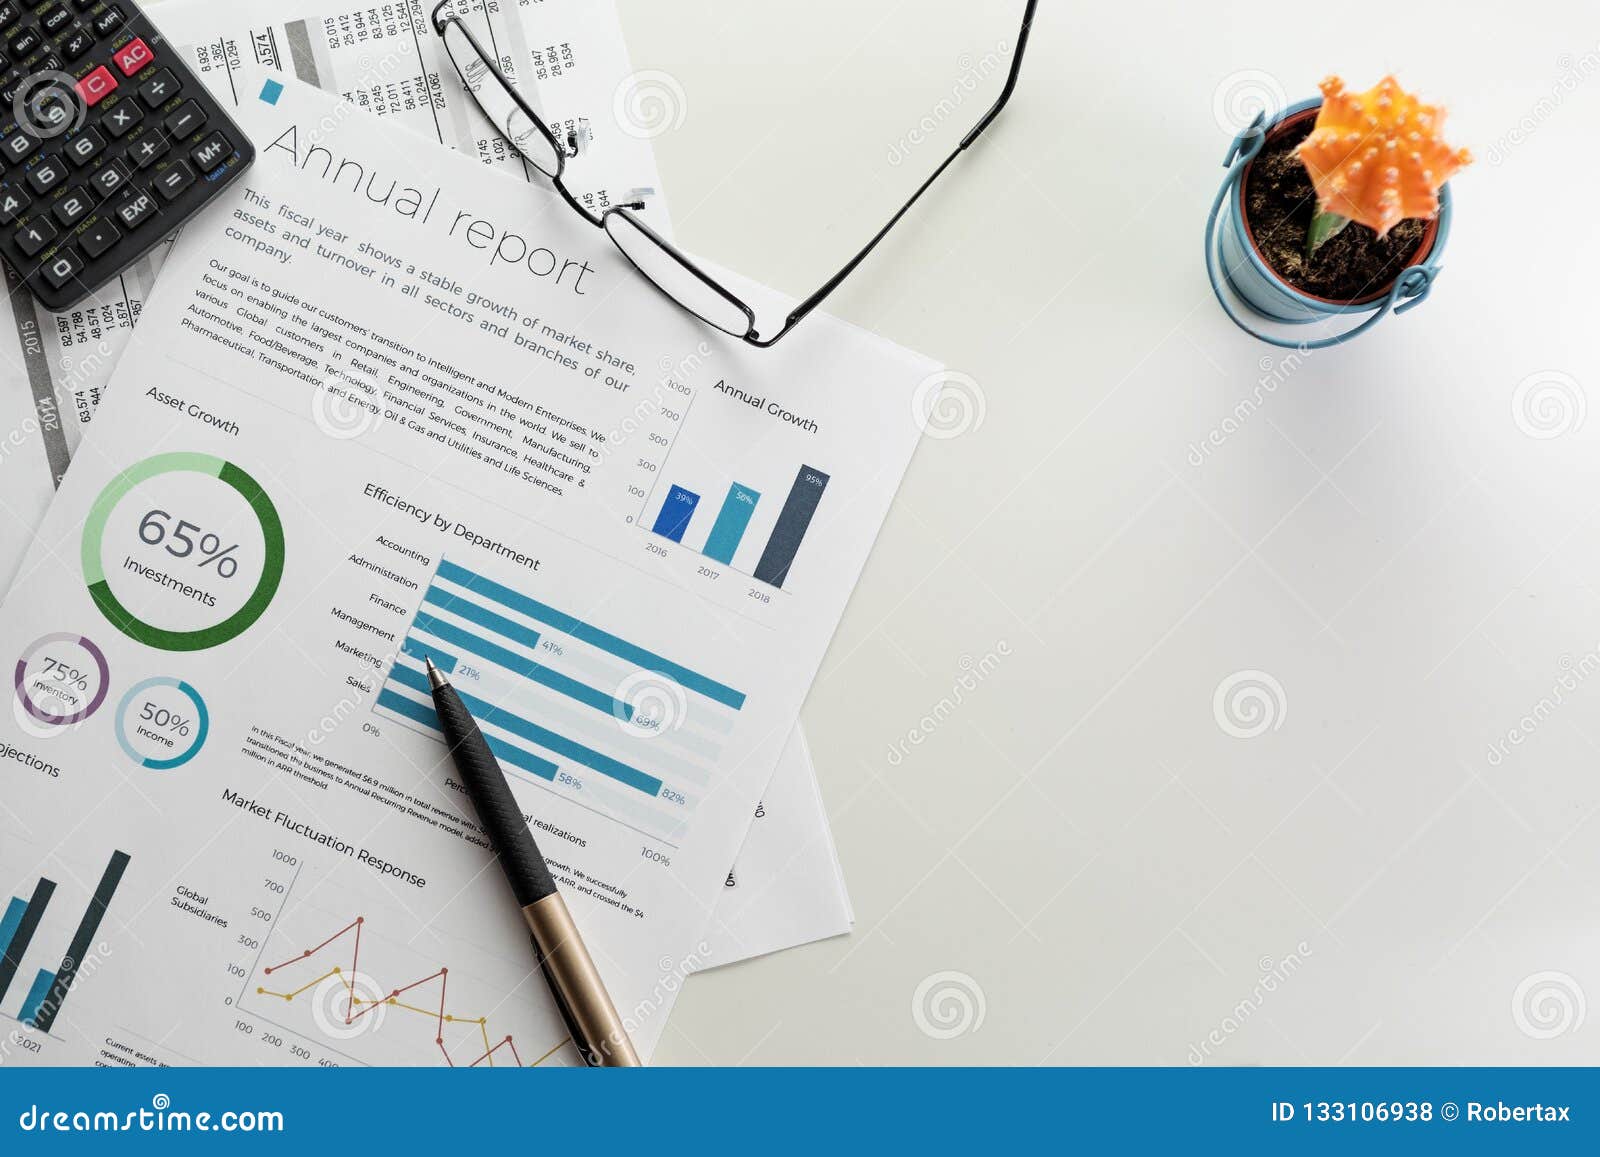 133 Annual Report Mockup Photos Free Royalty Free Stock Photos From Dreamstime